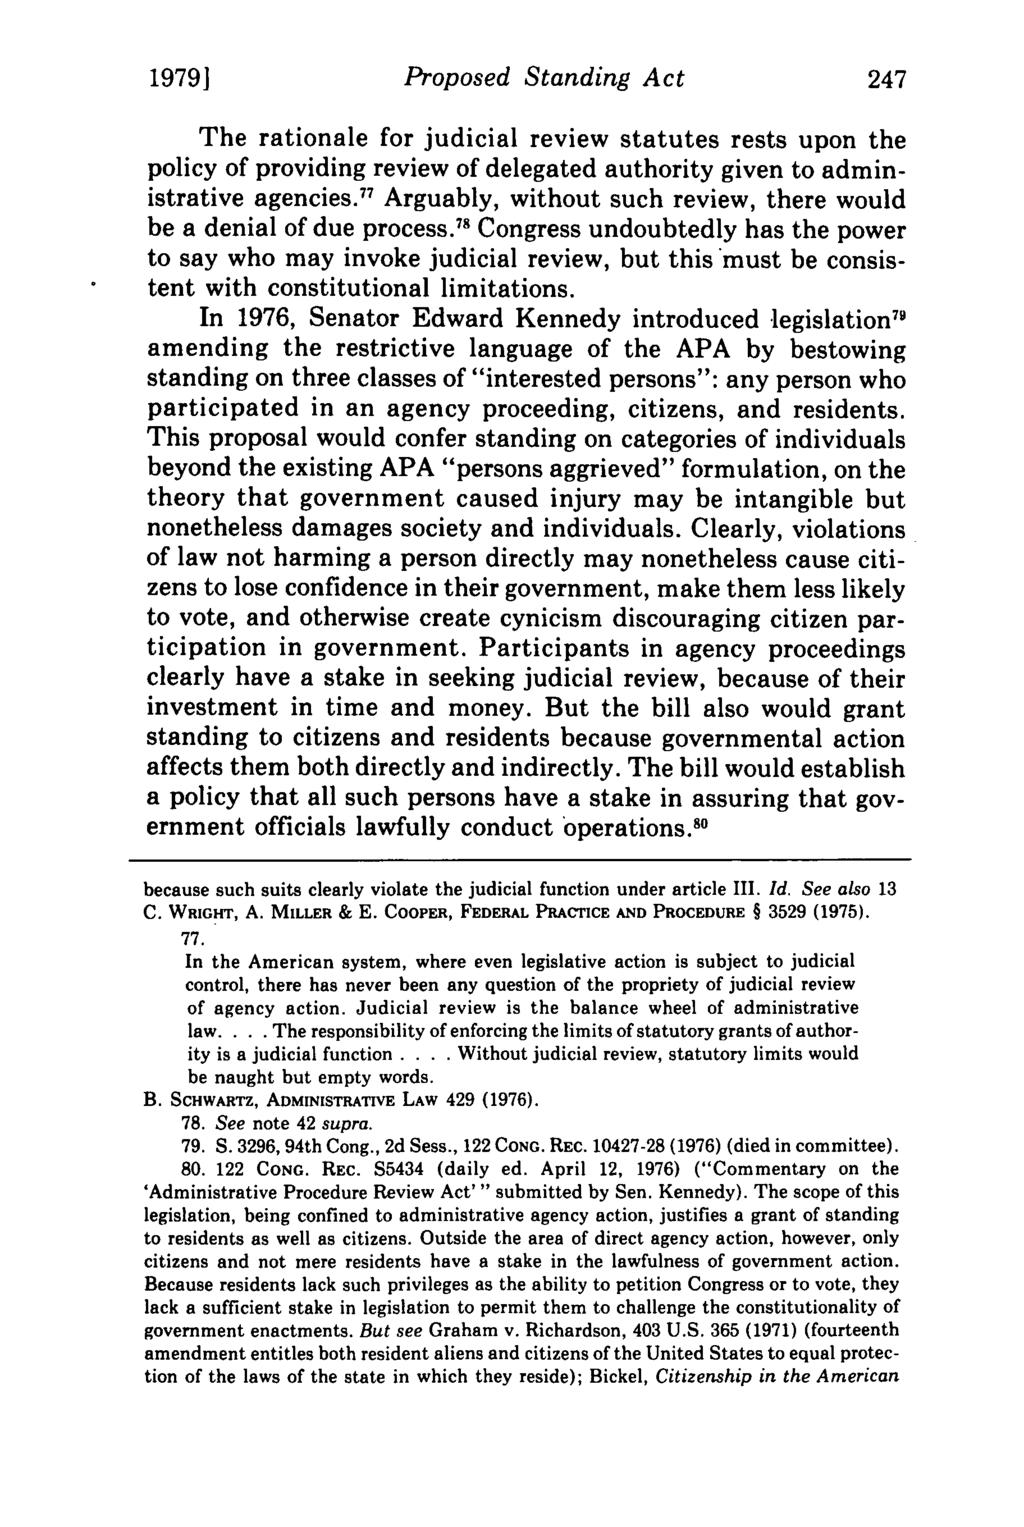 1979] Proposed Standing Act The rationale for judicial review statutes rests upon the policy of providing review of delegated authority given to administrative agencies.